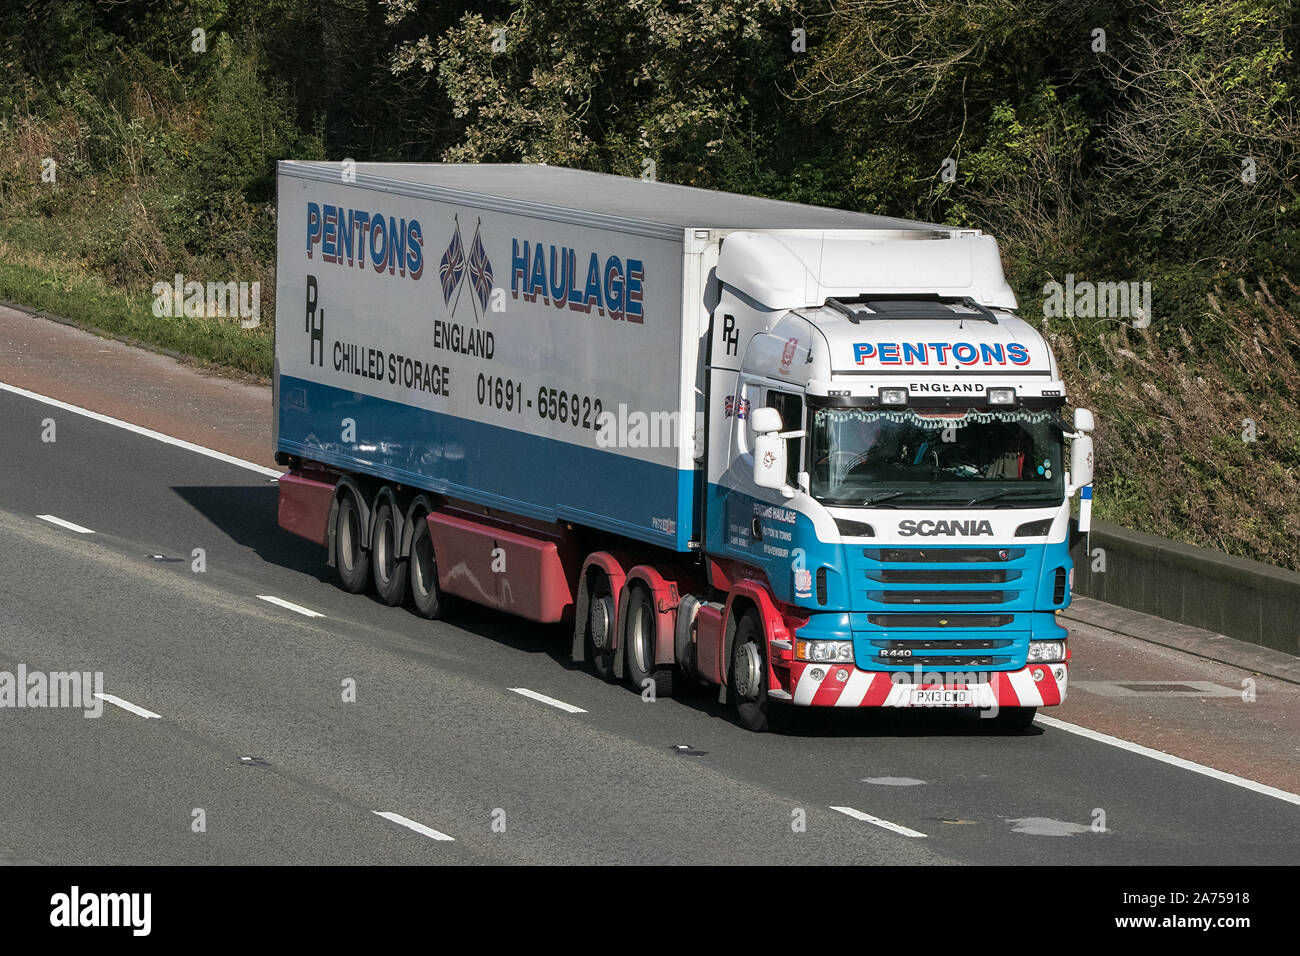 A Pentons Haluage Scania R440 chilled storage truck Stock Photo